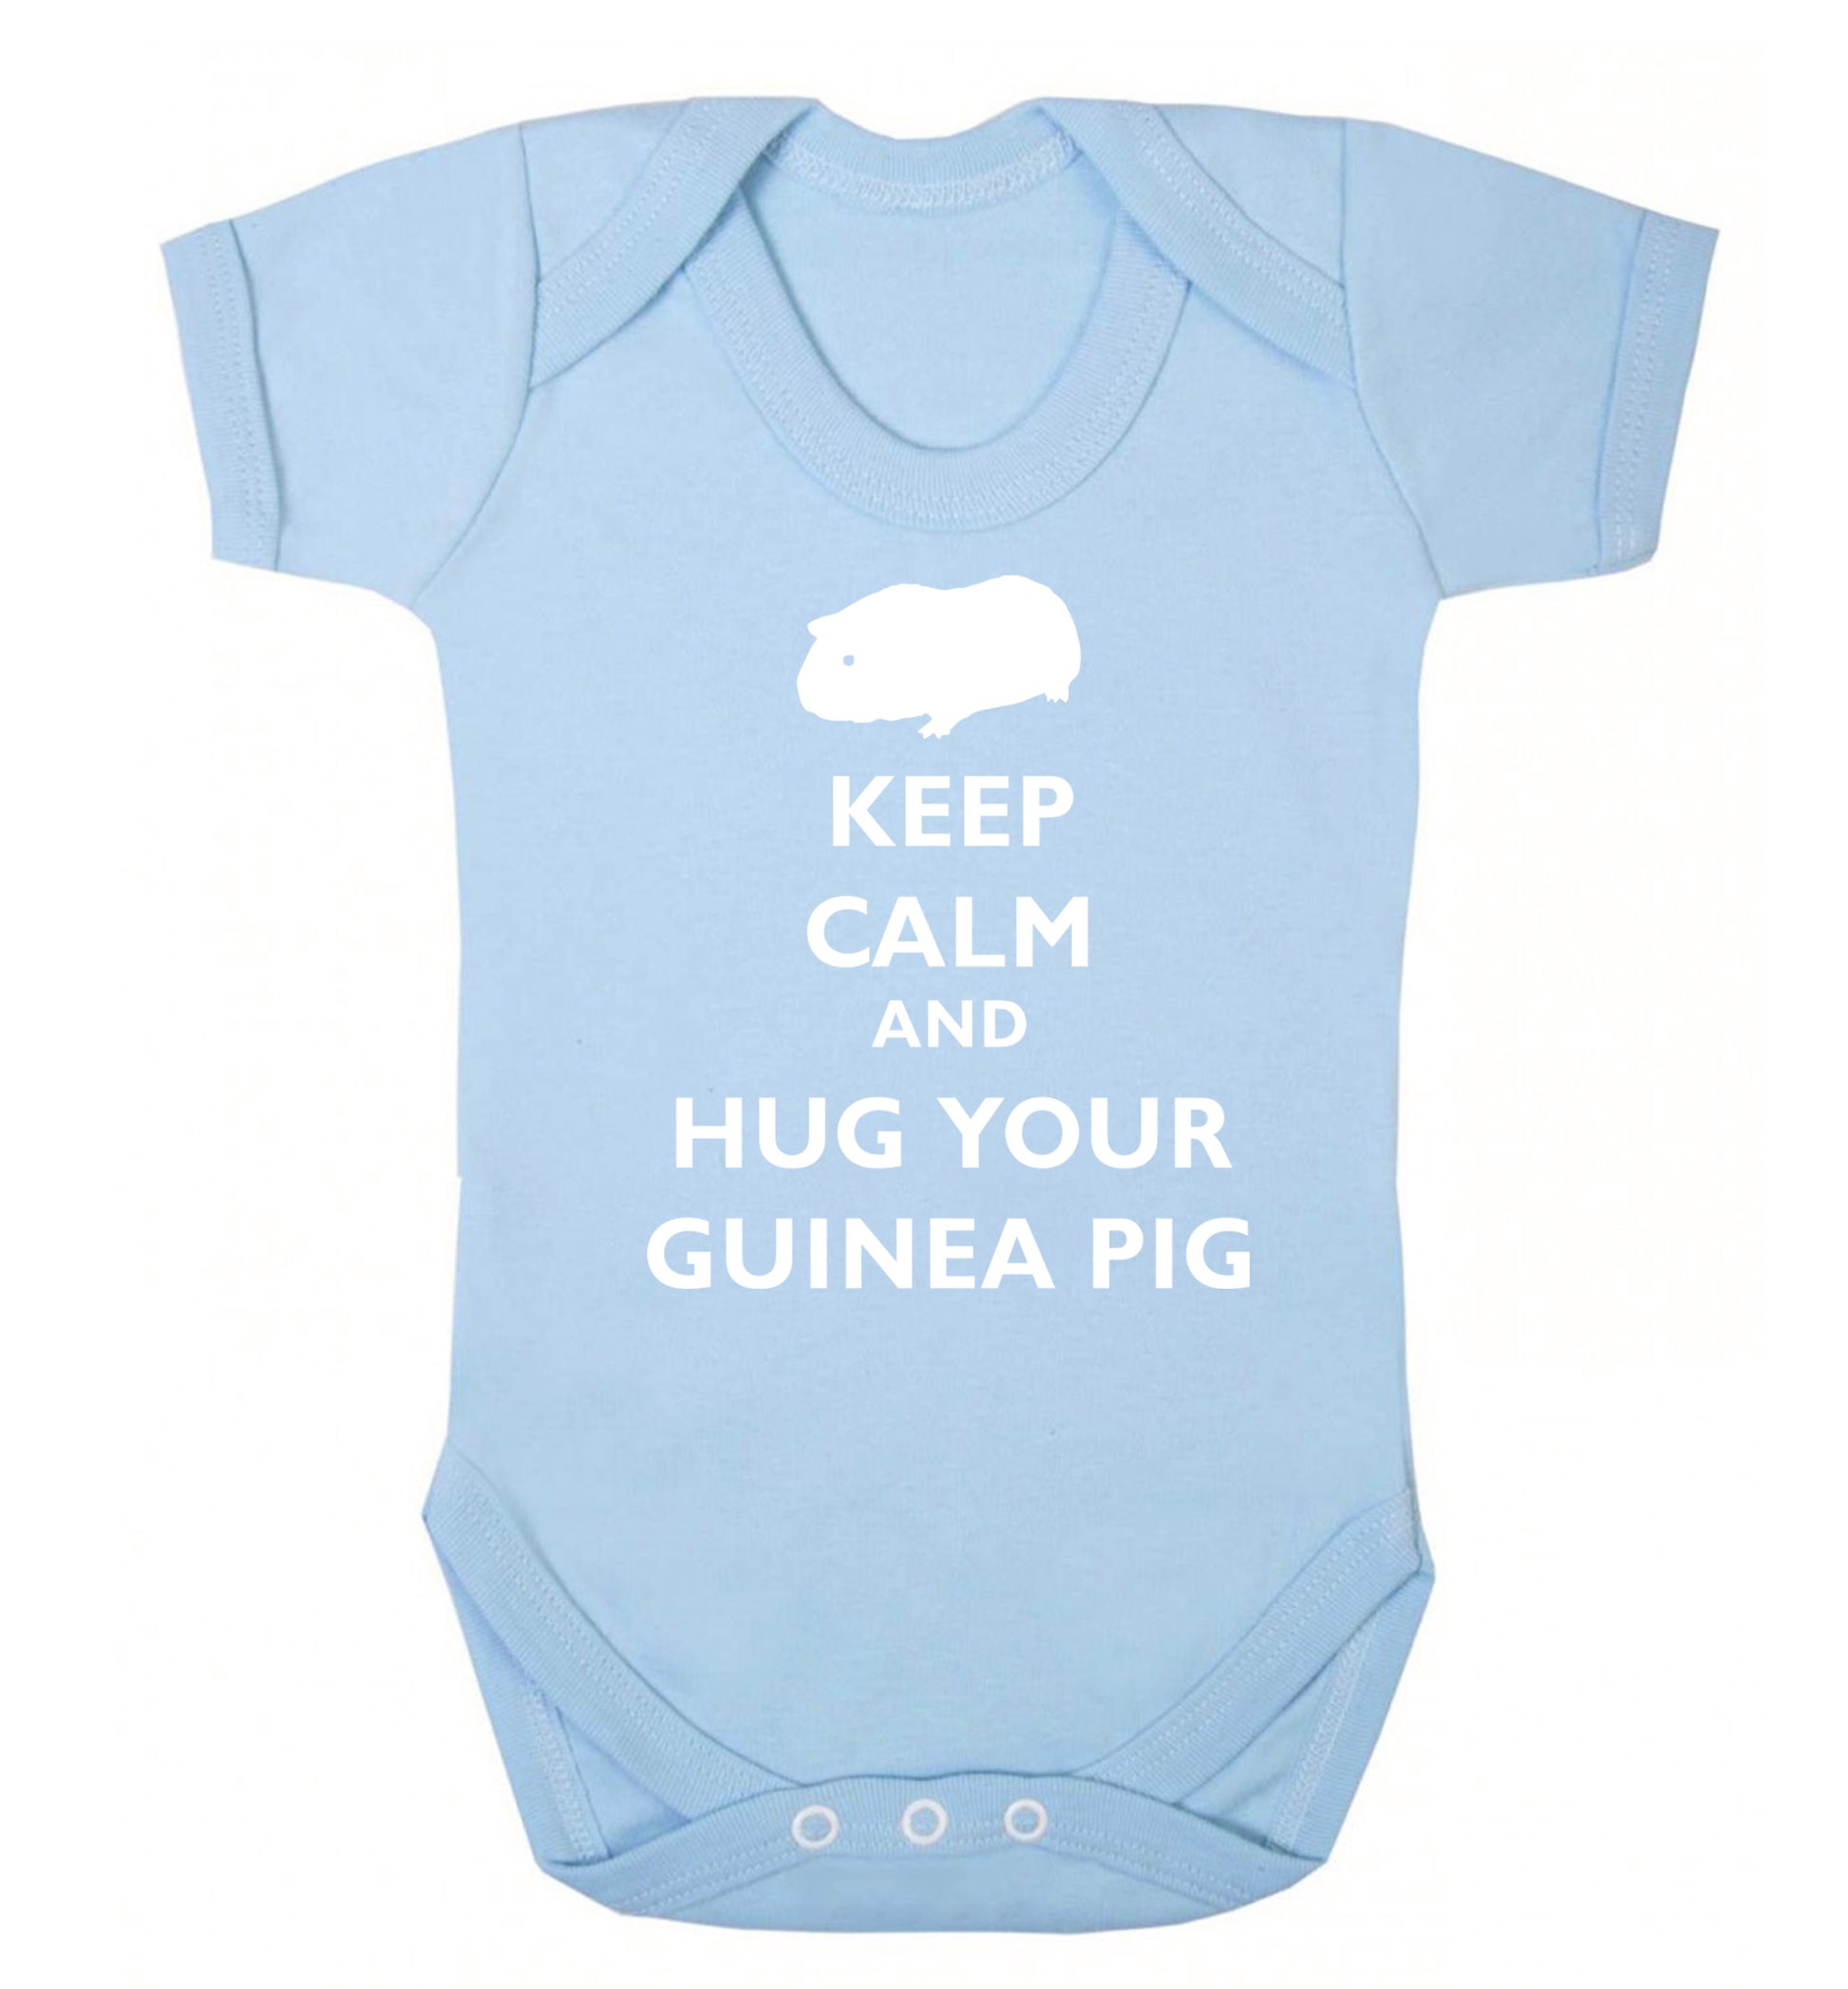 Keep calm and hug your guineapig Baby Vest pale blue 18-24 months